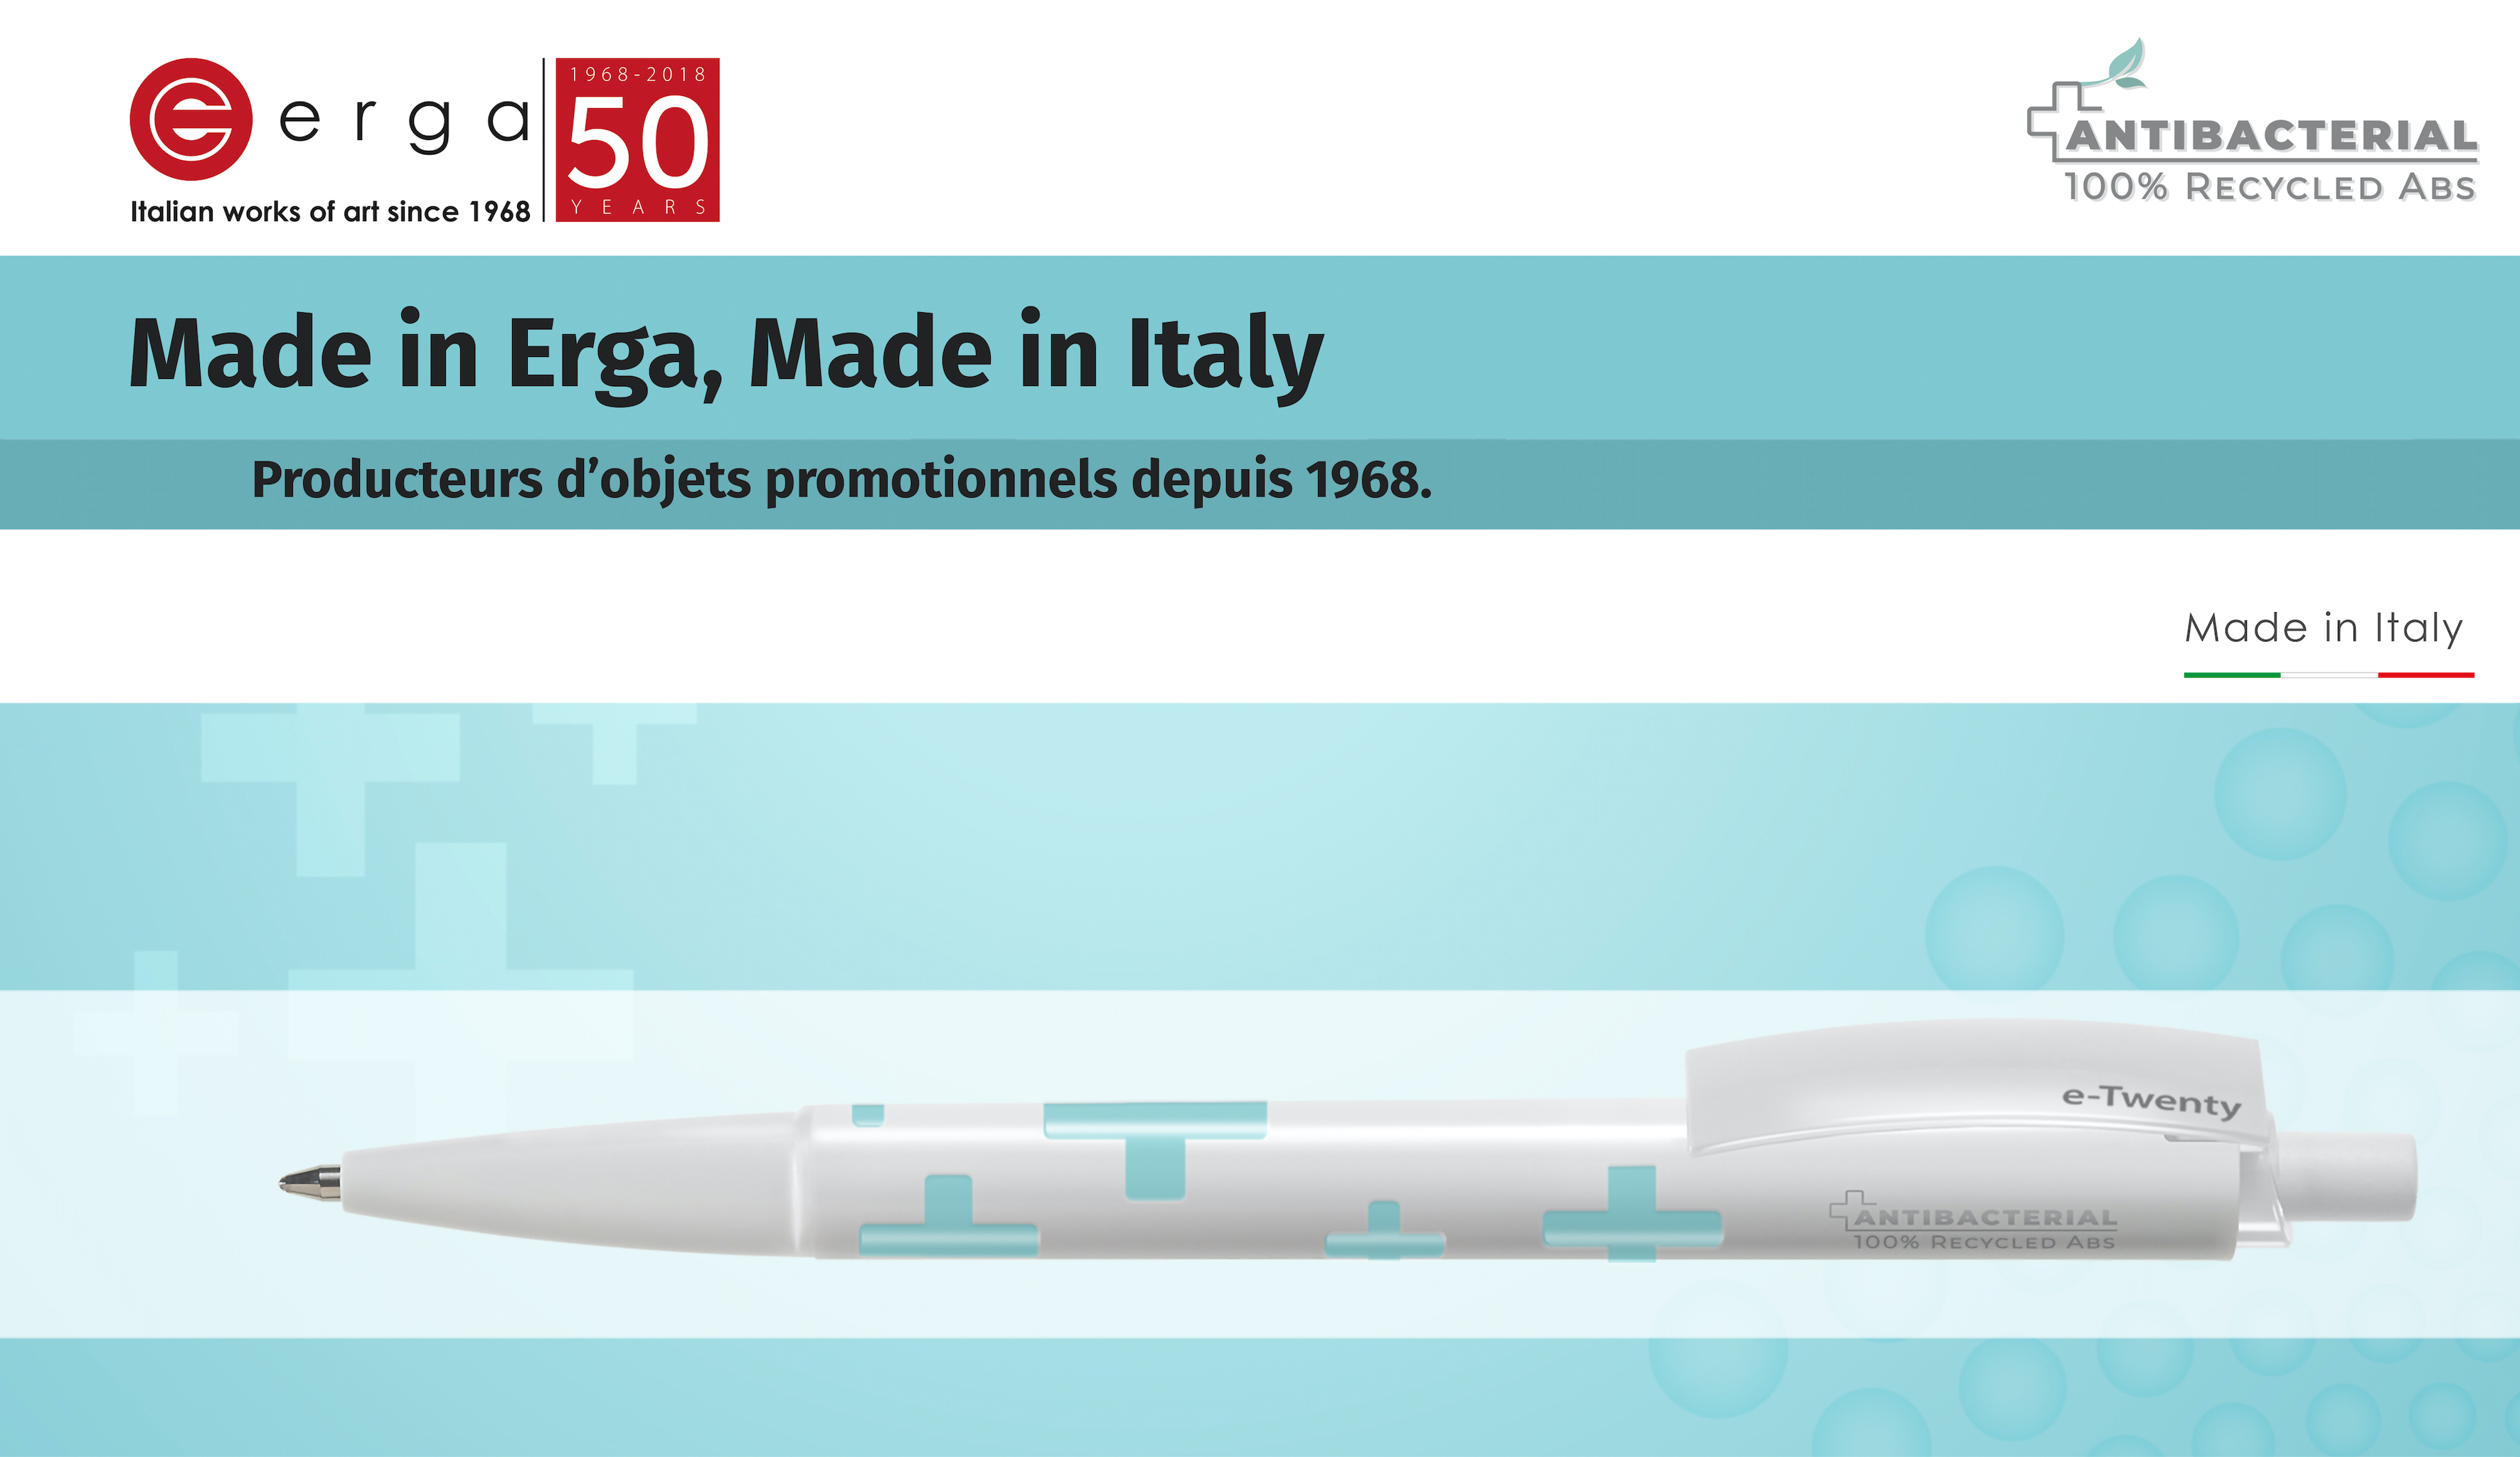 ANTIBACTERIAL PENS MADE IN ITALY BY ERGA